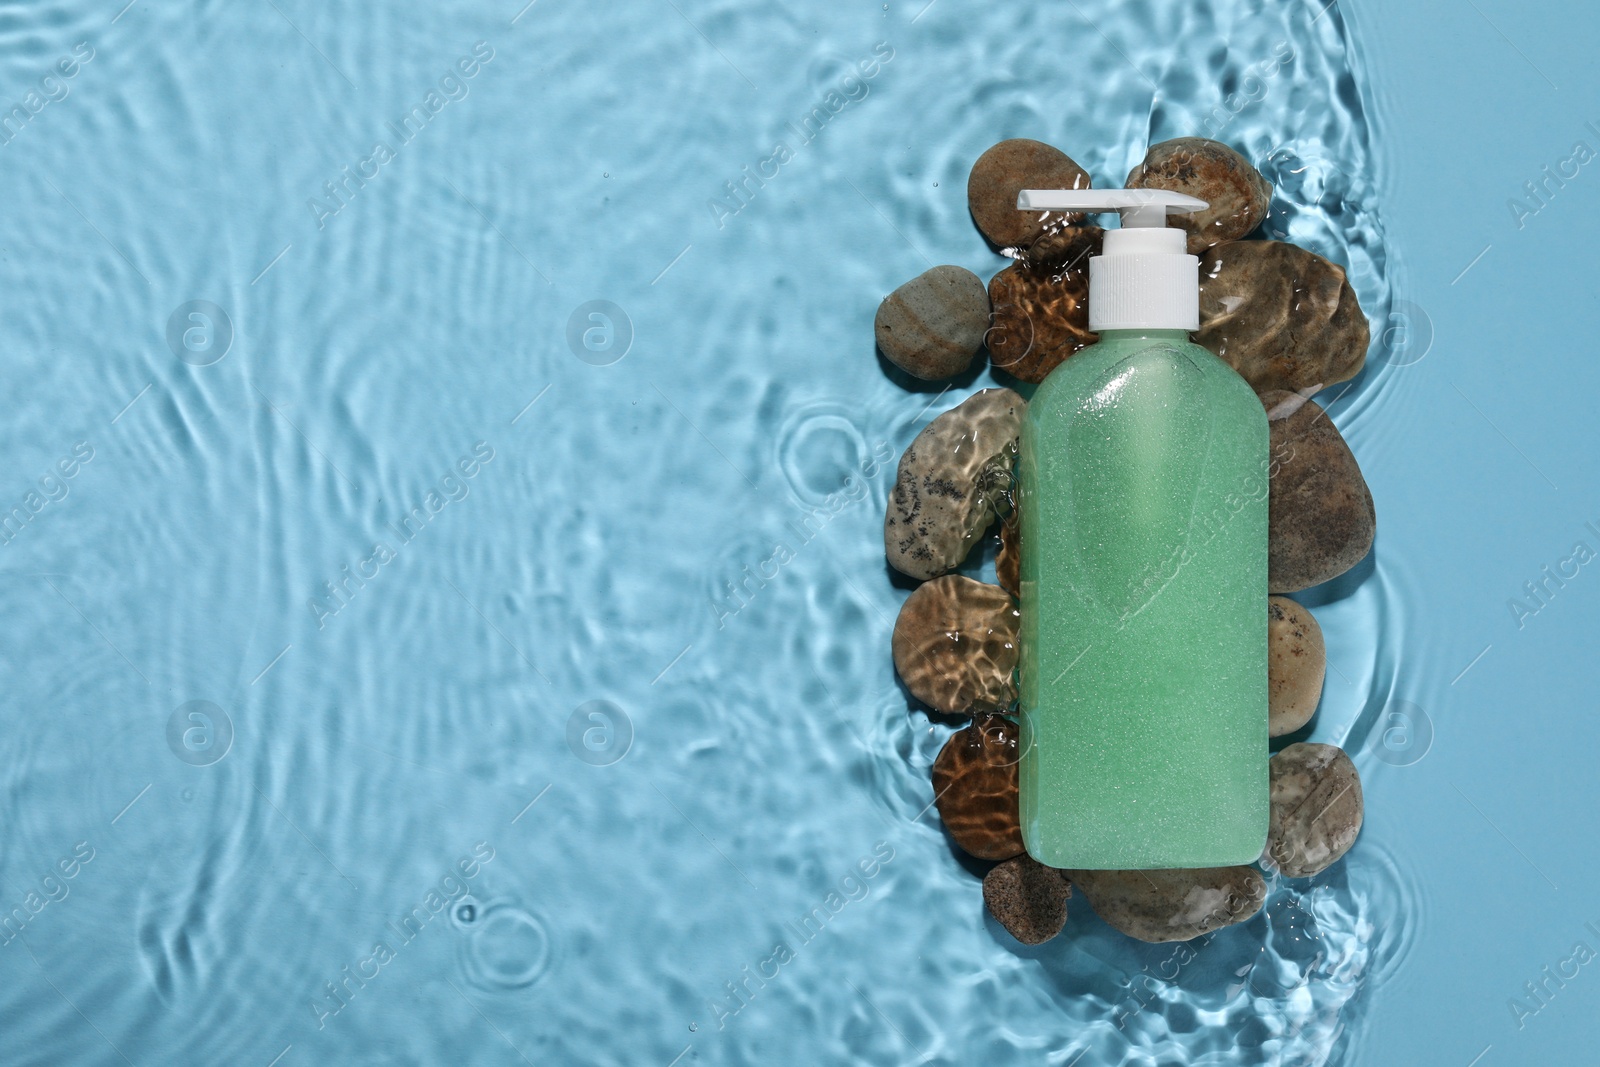 Photo of Bottle of face cleansing product and stones in water against light blue background, flat lay. Space for text